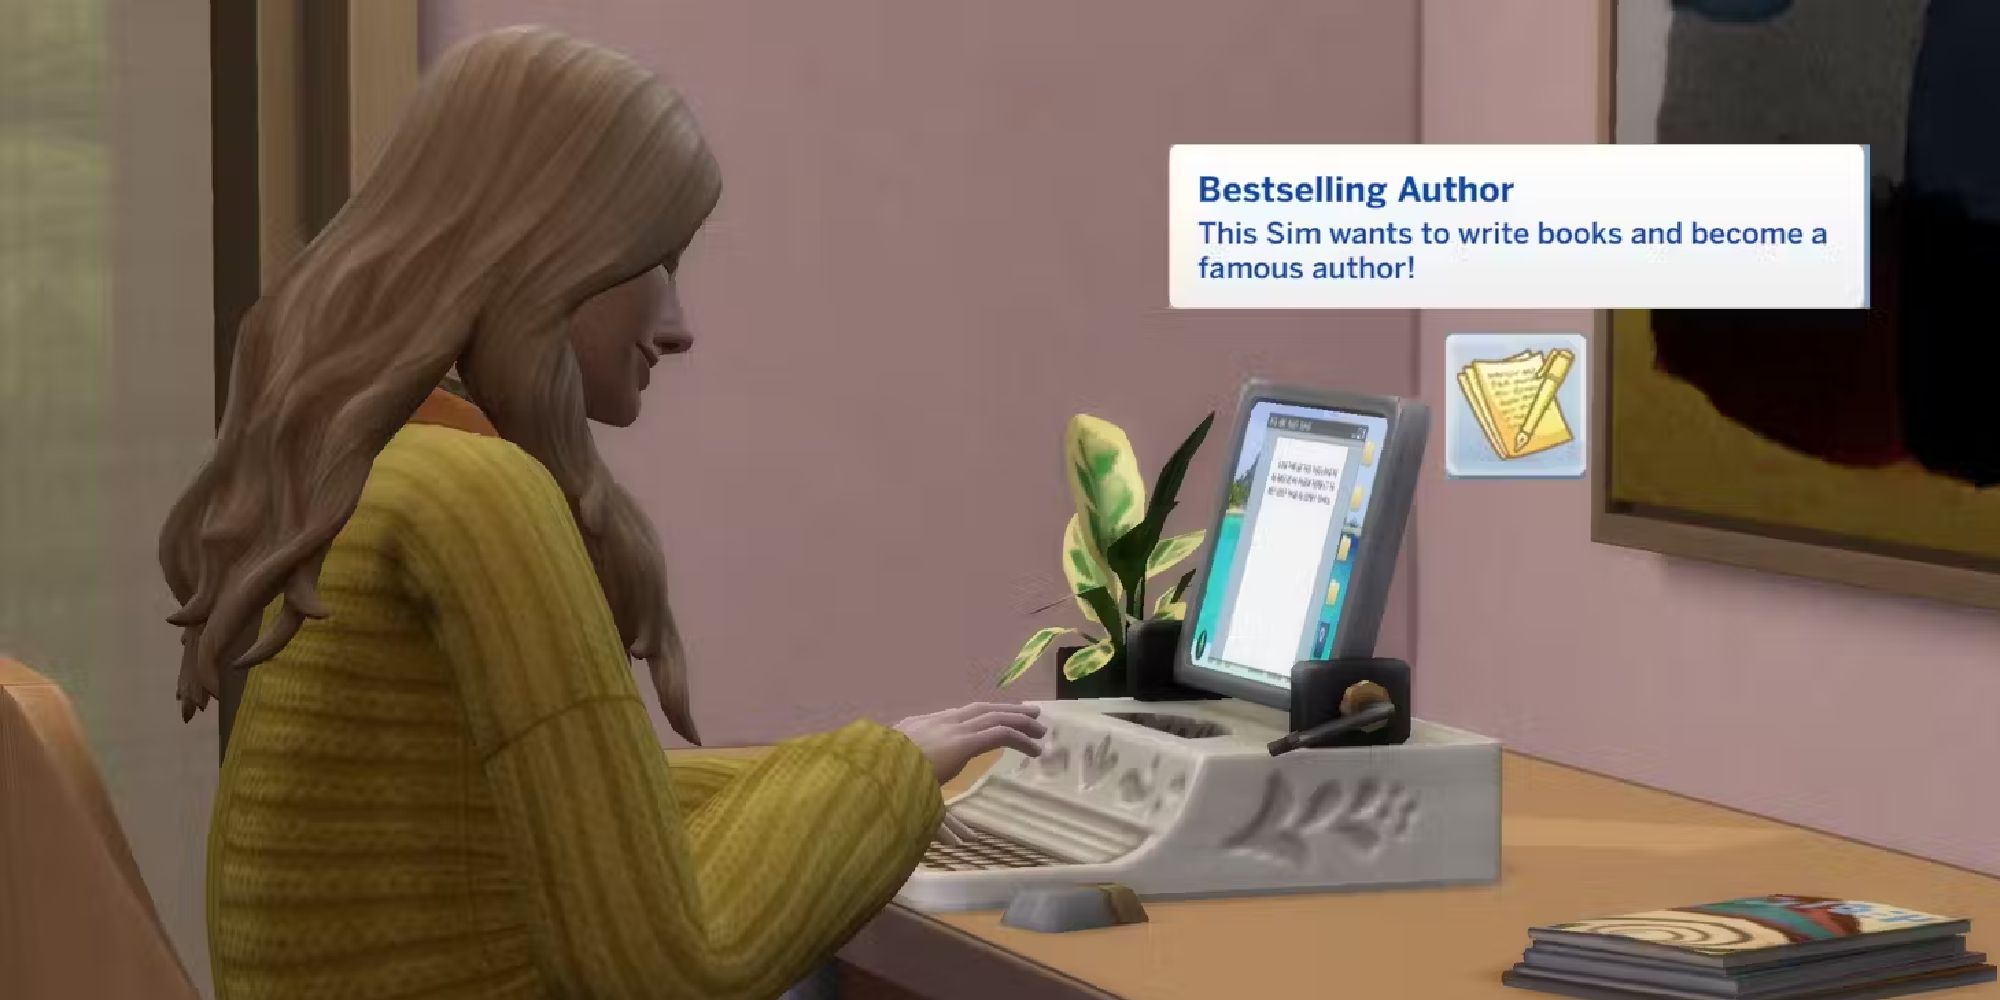 sims 4 bestselling author aspiration png transparent on image of sim at computer